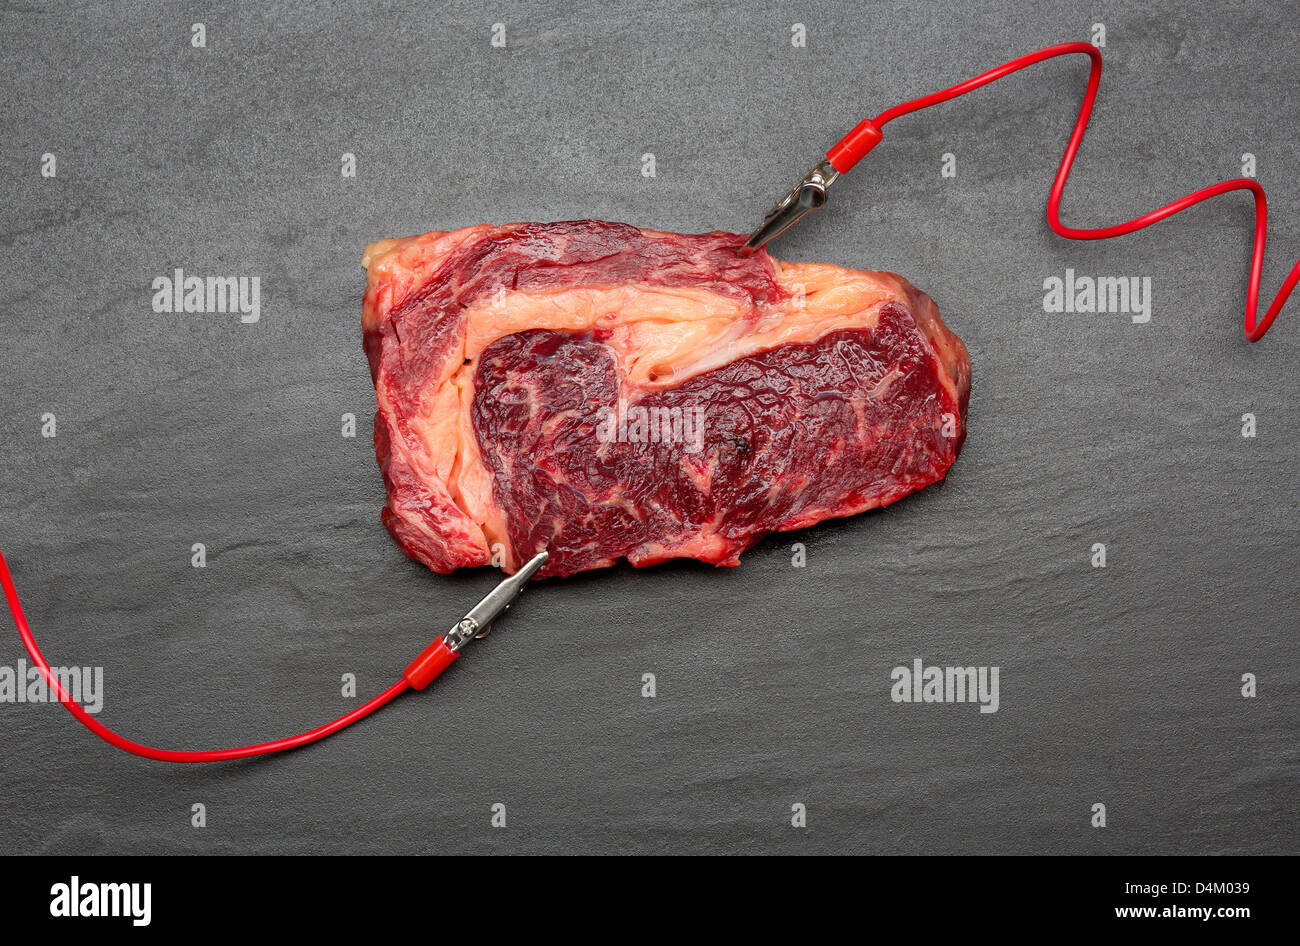 Meat connected to electrodes Stock Photo